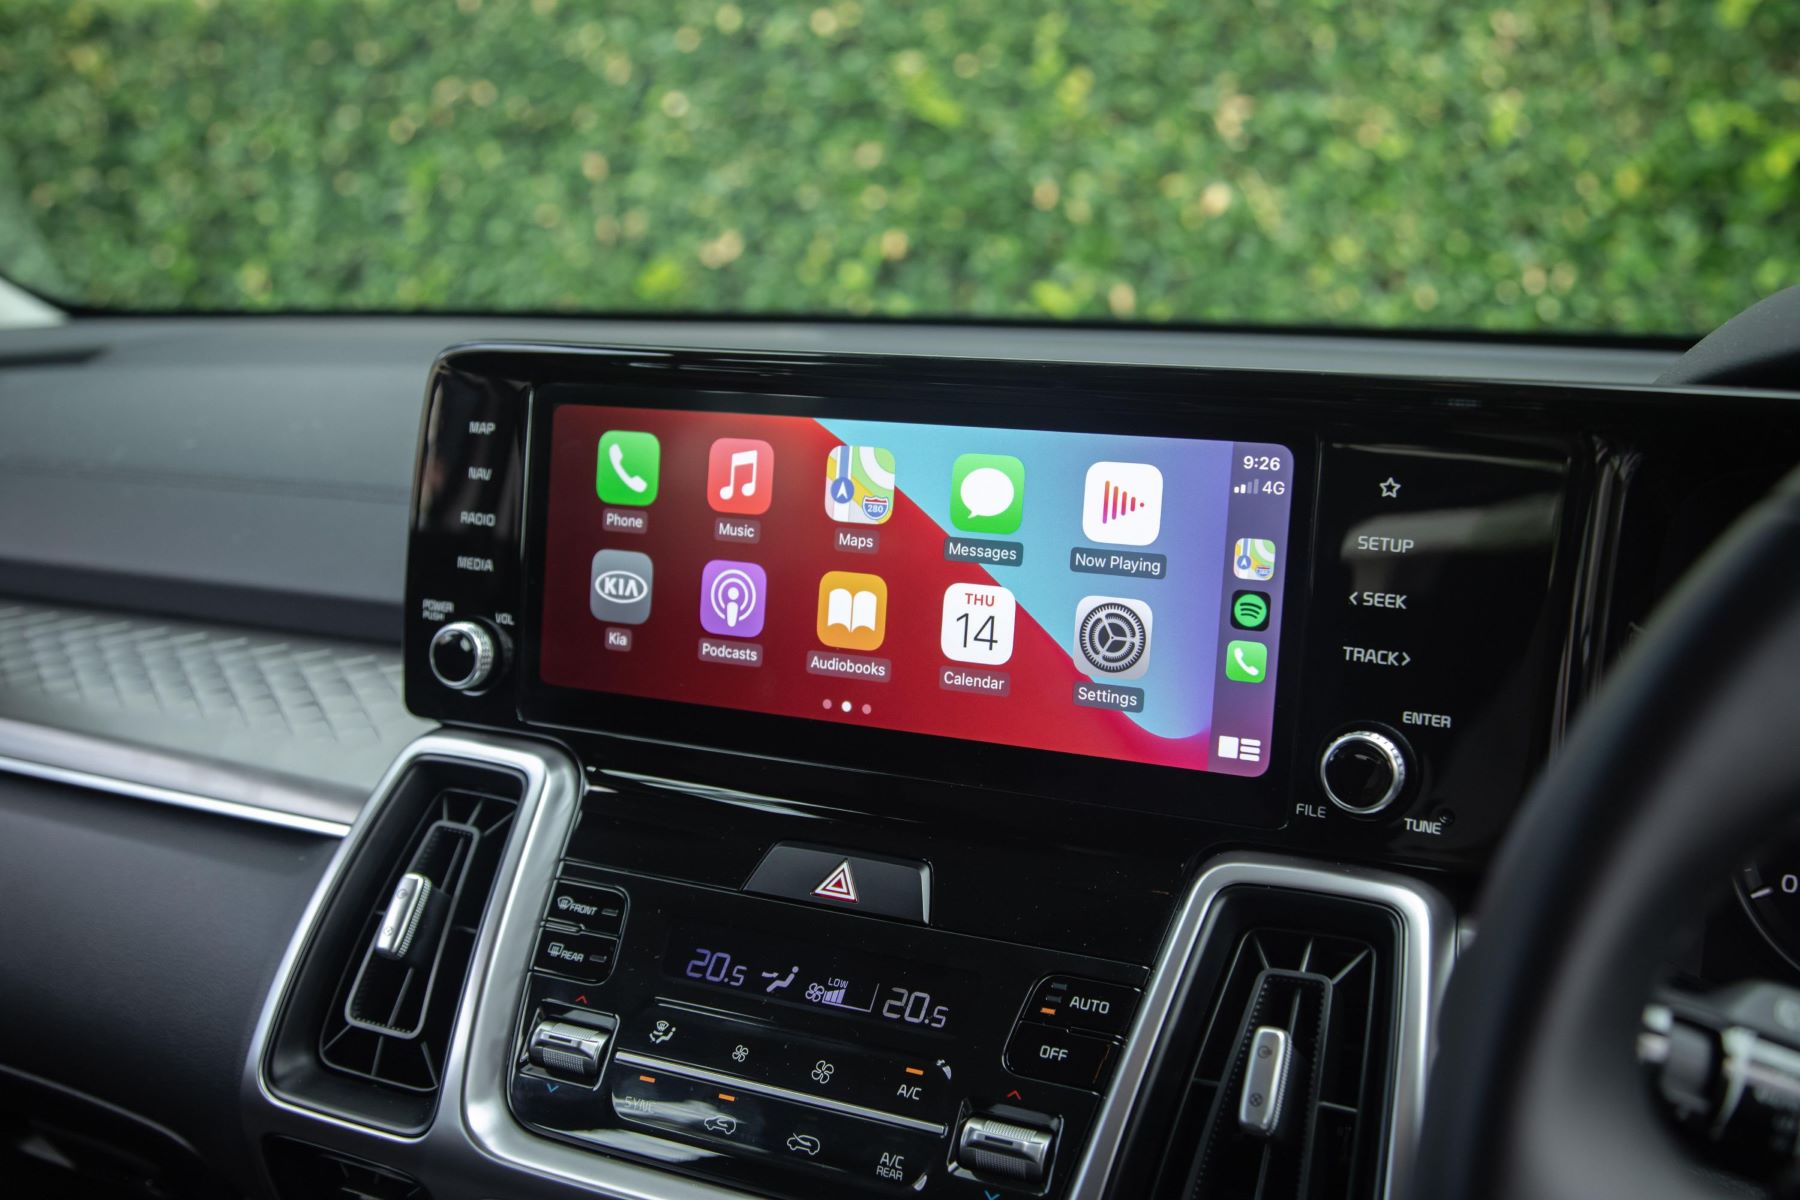 upgrade-your-ride-with-this-amazing-wireless-infotainment-system